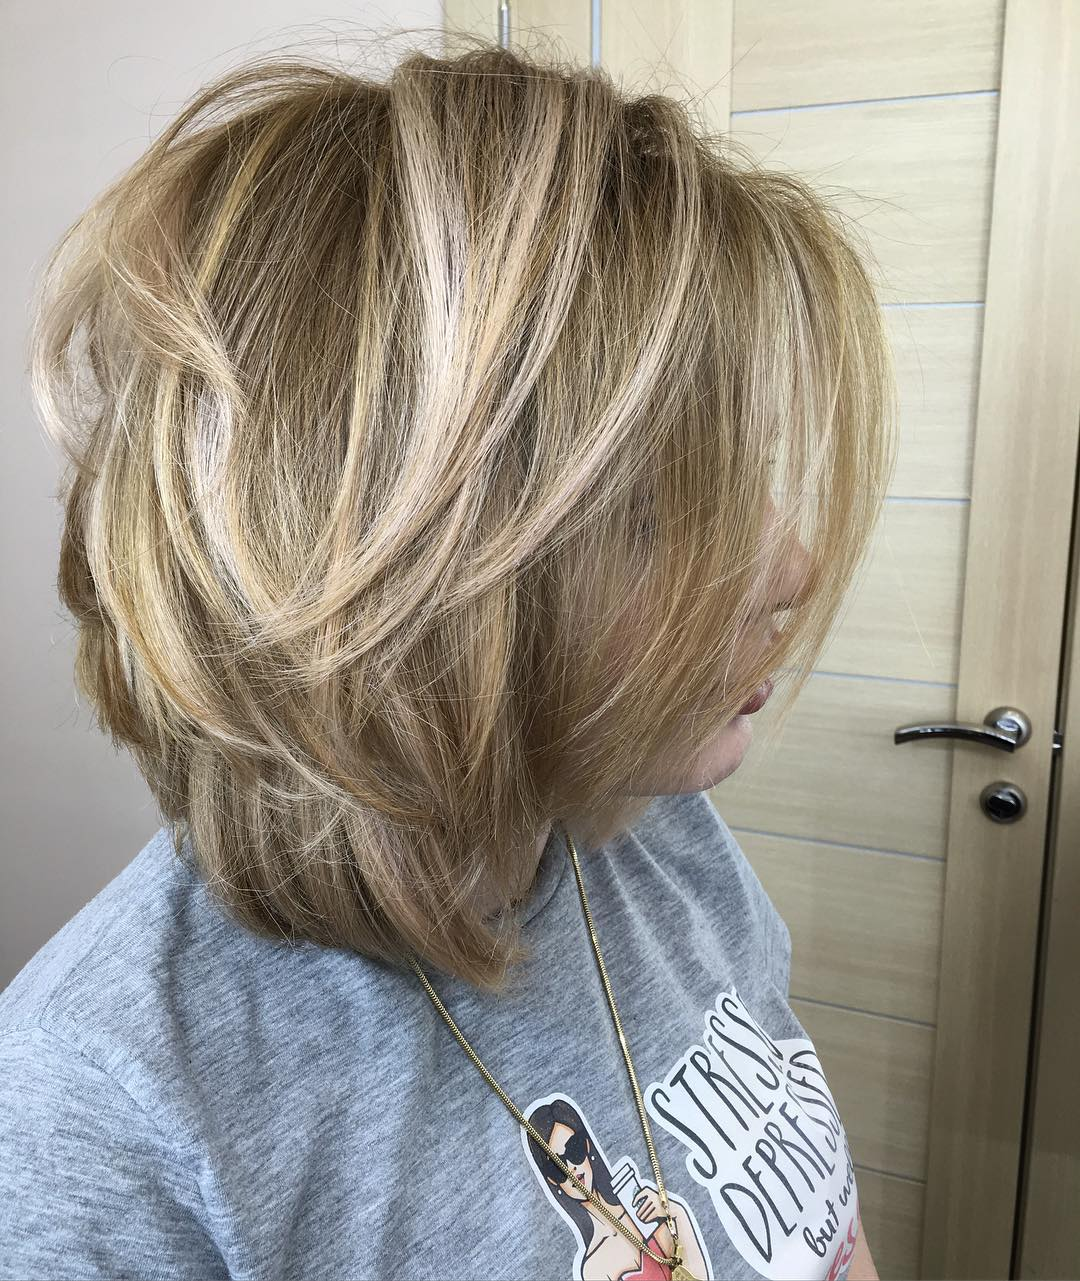 Bobbed Volume with Highlights Shoulder Length Hairstyles